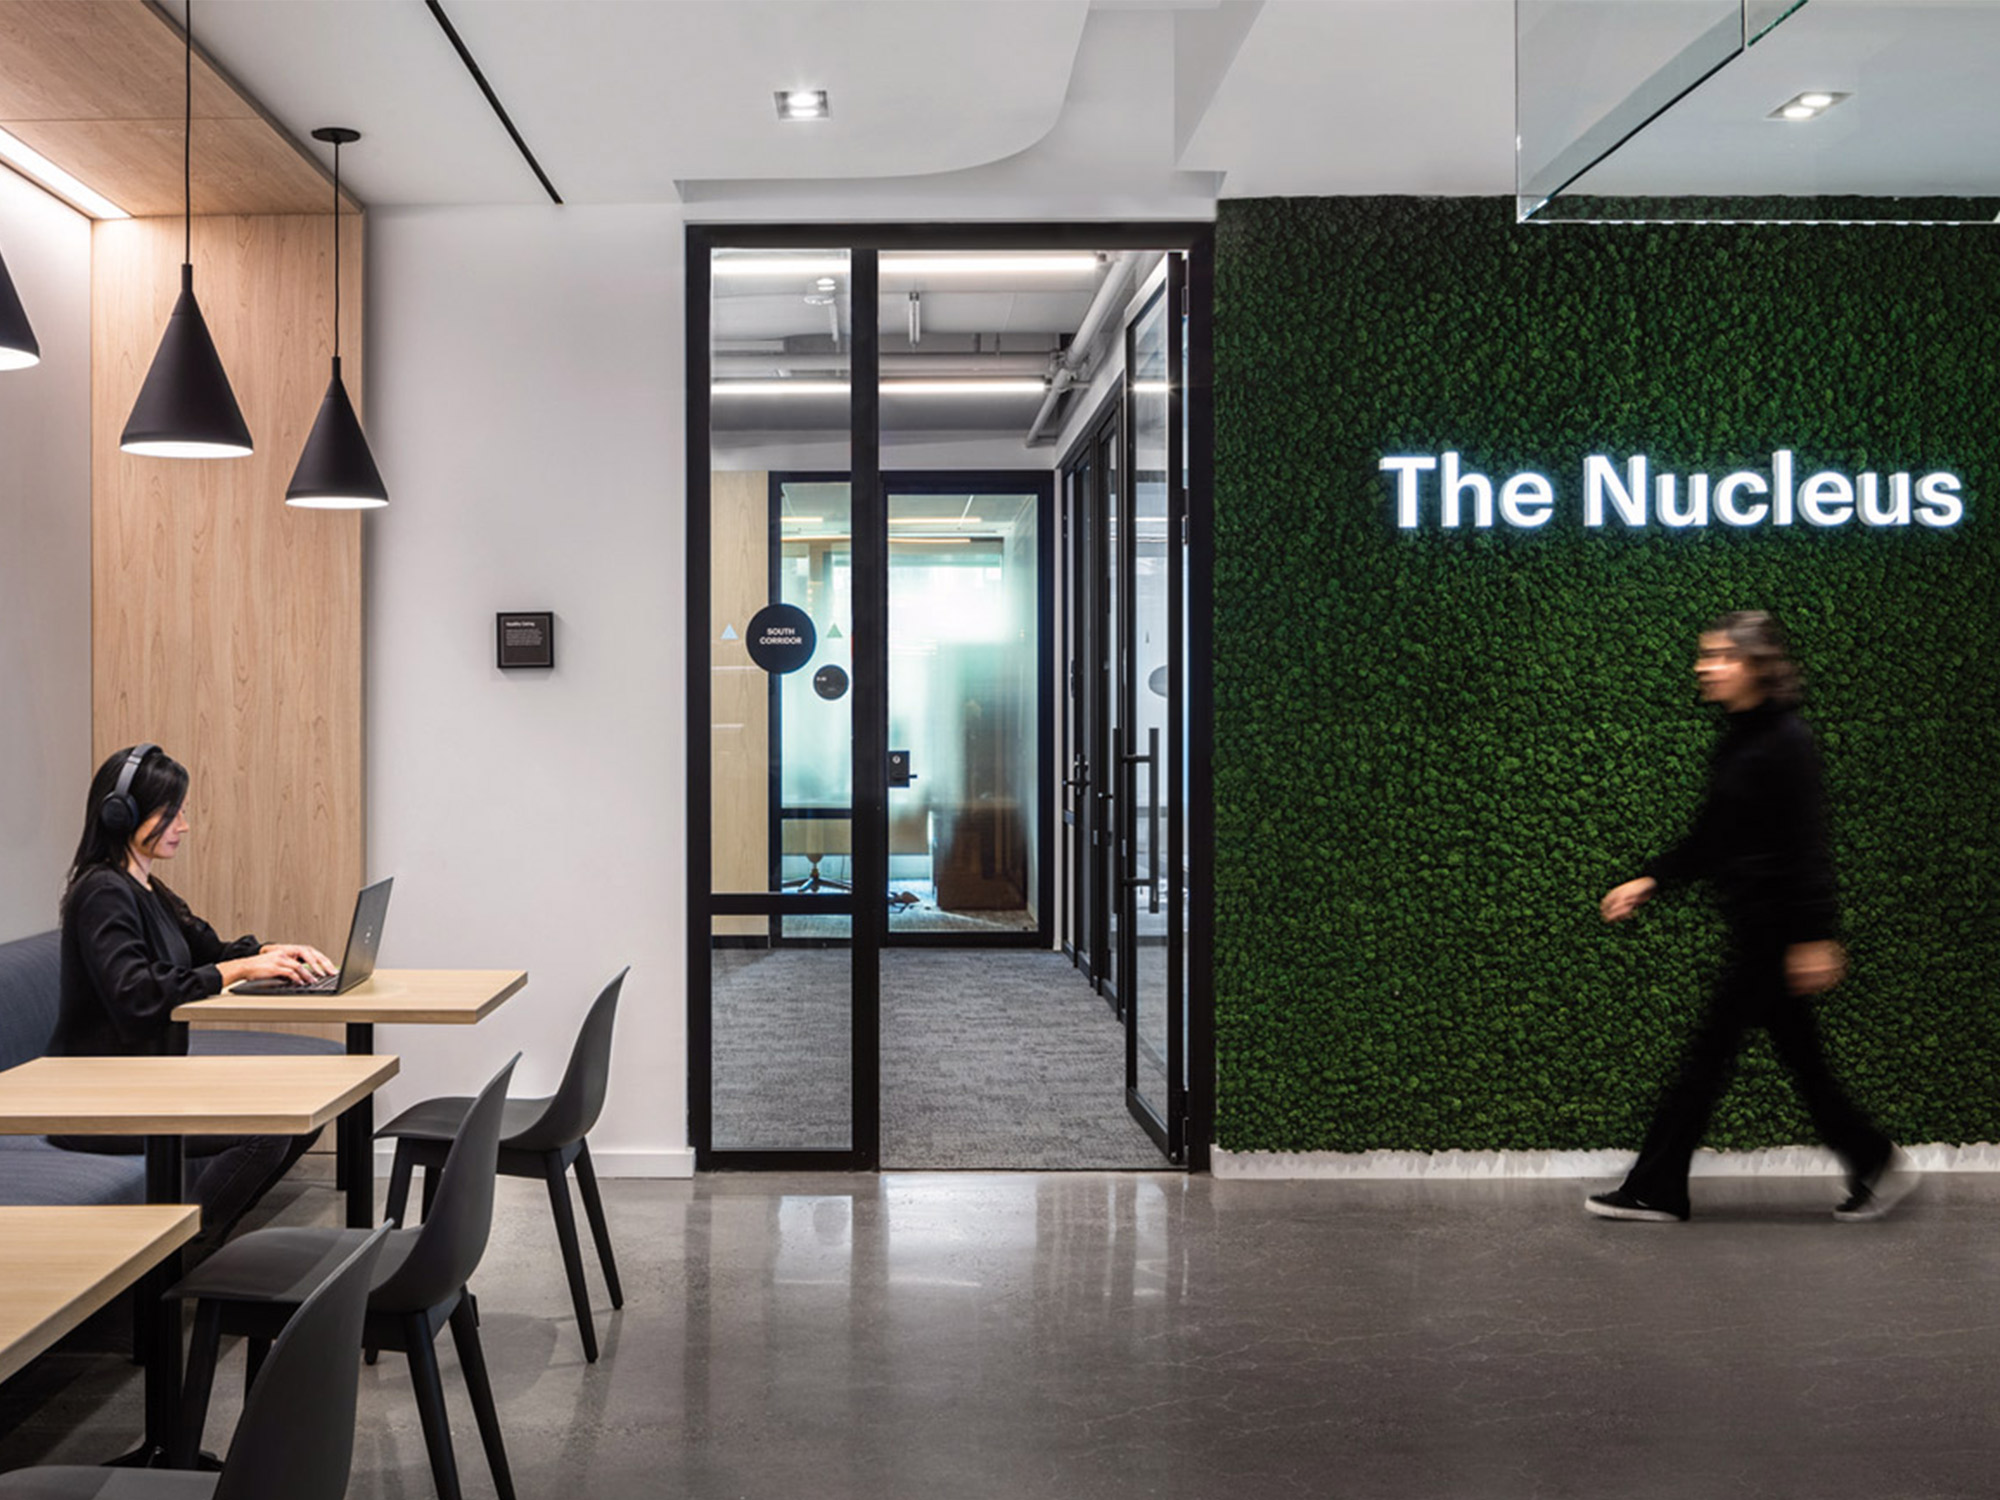 A modern office environment featuring a sleek workspace with an individual working at a long table, pendant lights above, and a vibrant green living wall with the label "the nucleus" illuminated, delineating a space for focused work or collaboration.